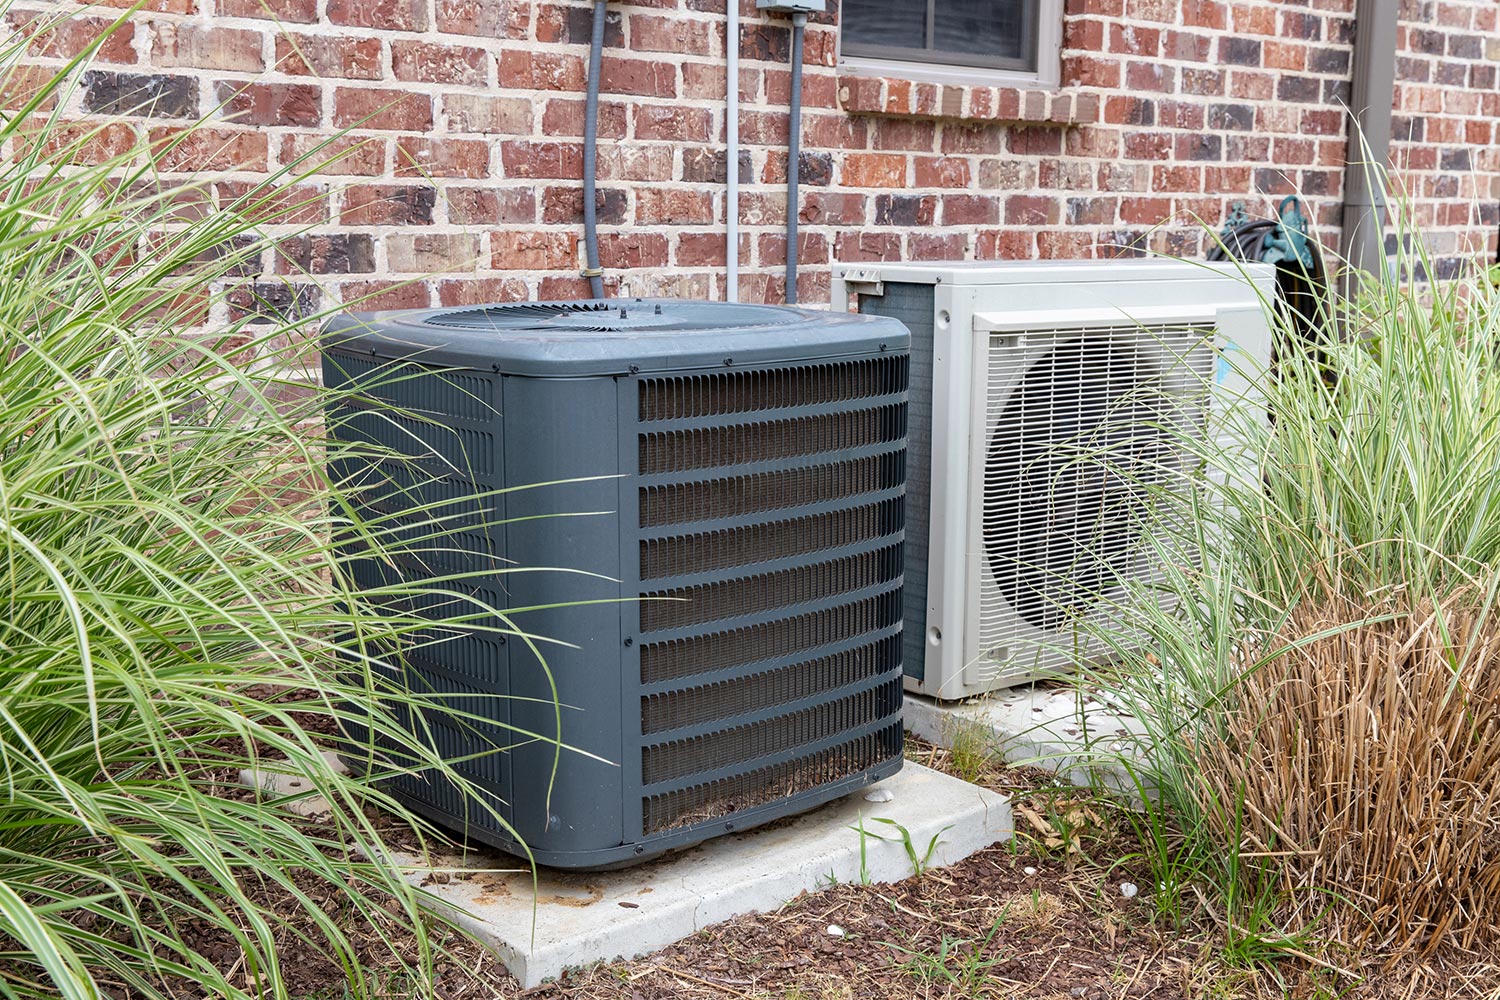 Regular home HVAC air conditioner system and mini-split next to each other